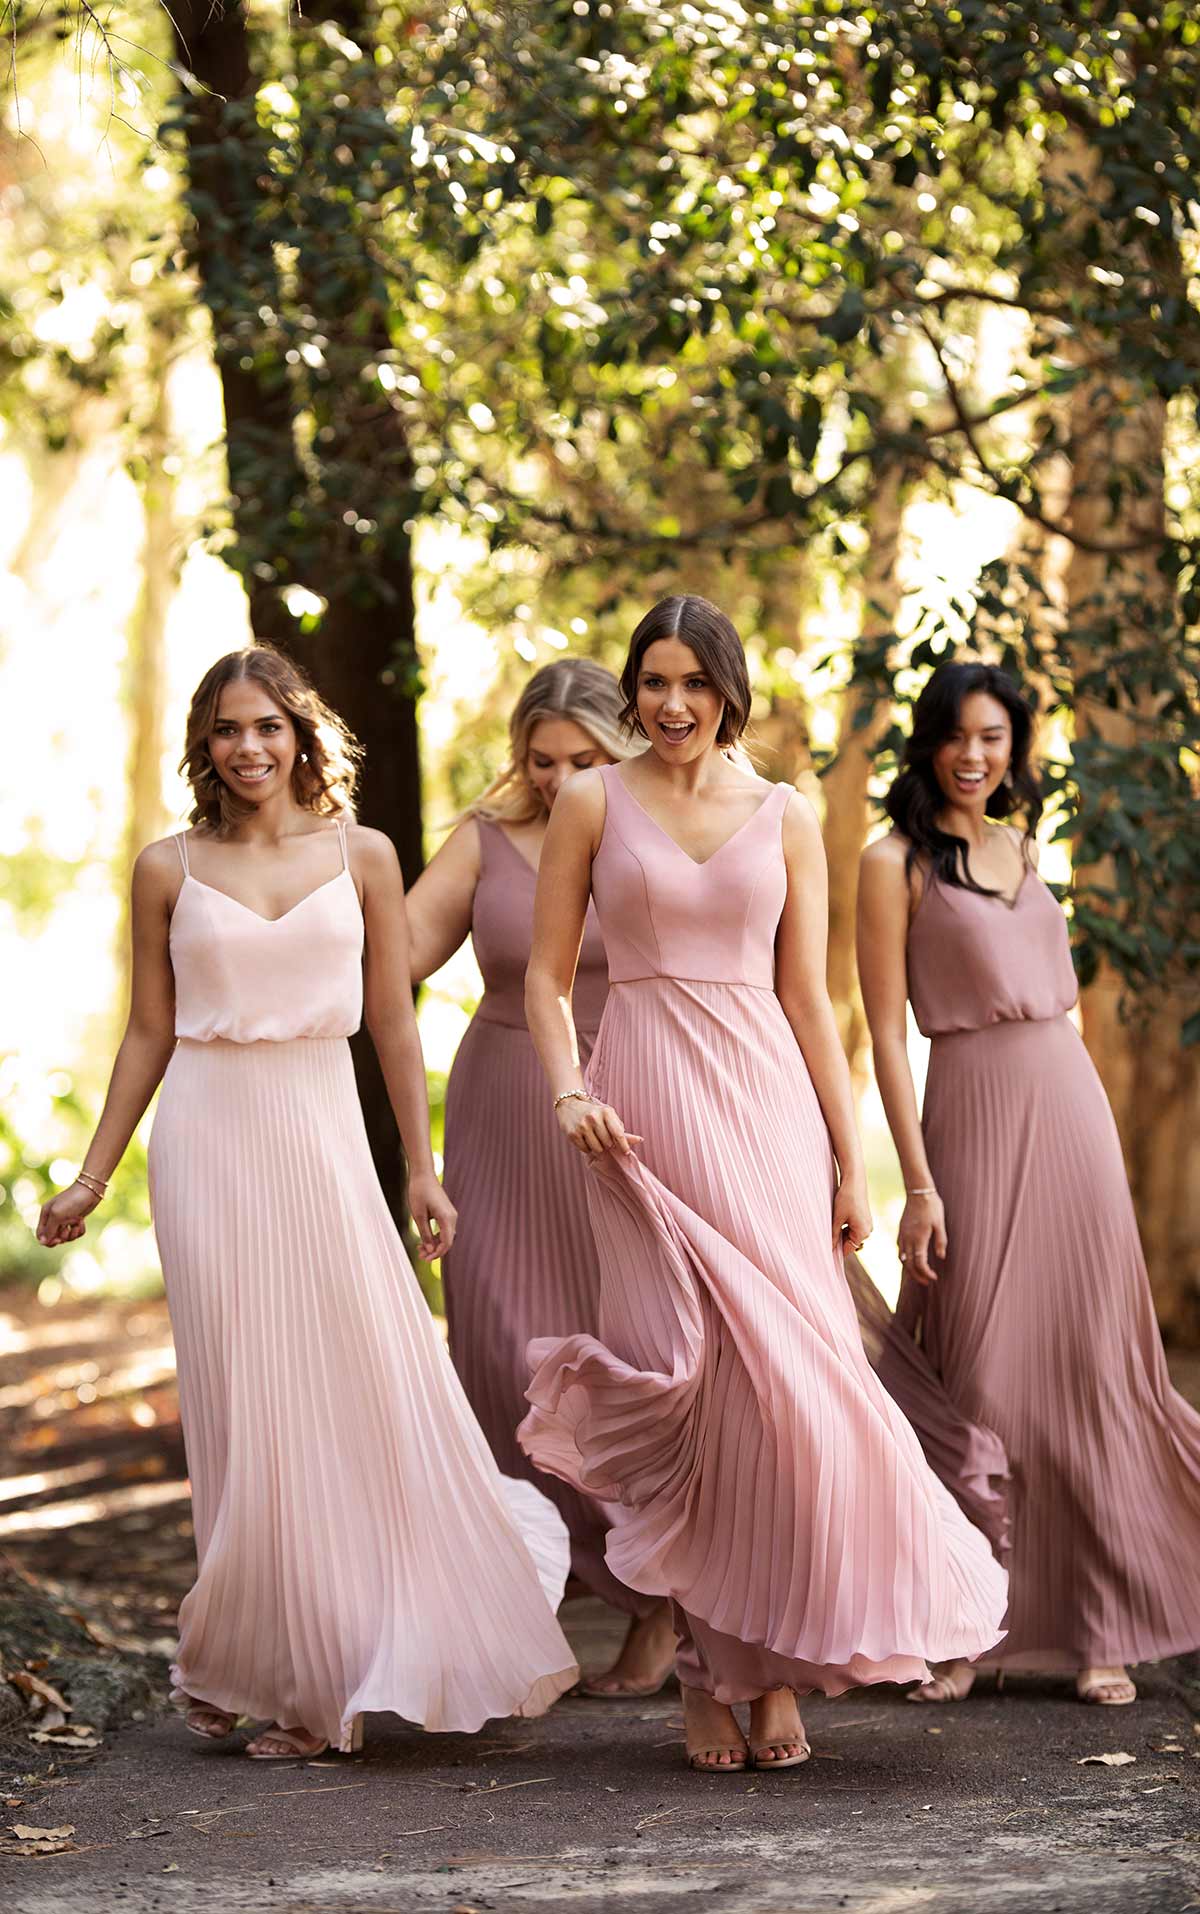 Mismatched Bridesmaid Dresses Perfectly For 2023 Wedding Trend - Tulle &  Chantilly Wedding Blog